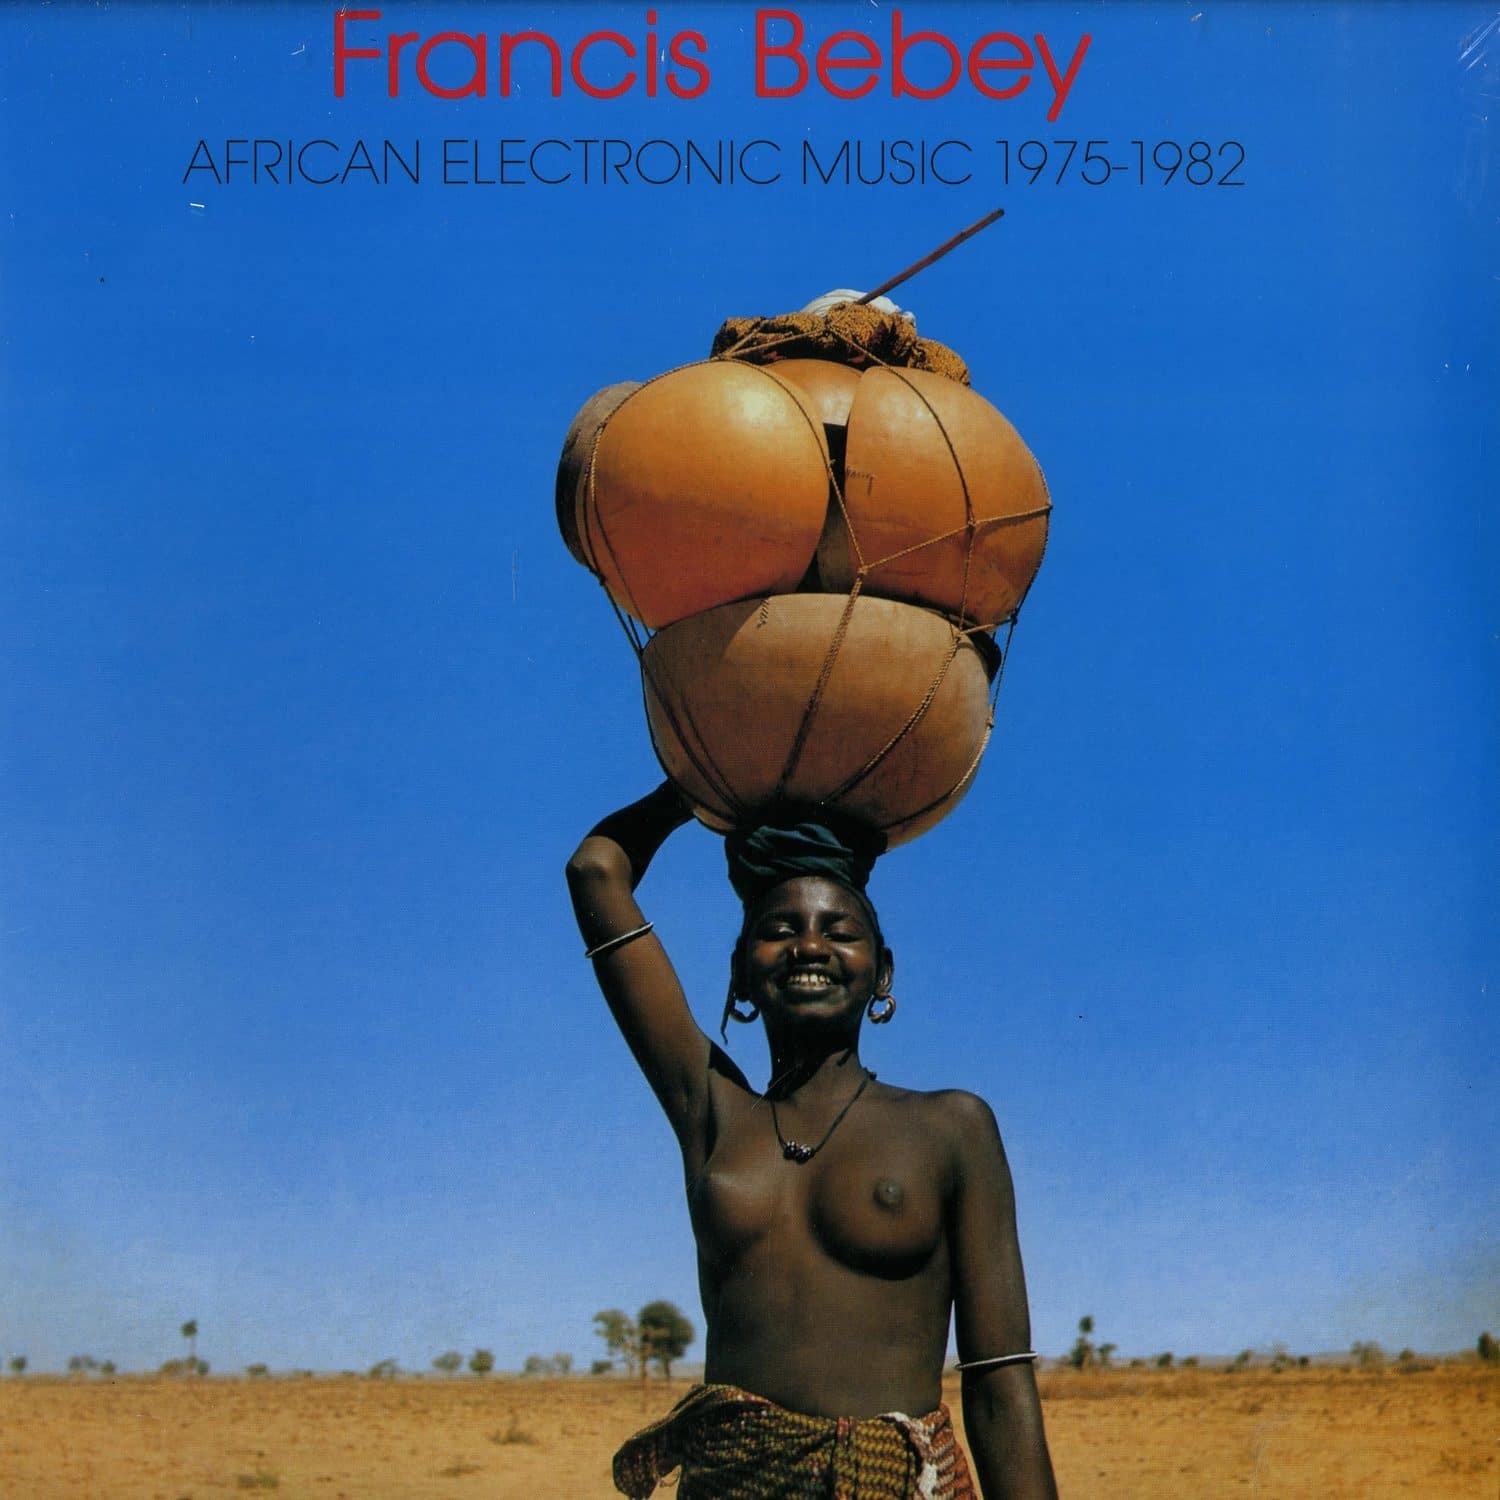 Francis Bebey - AFRICAN ELECTRONIC MUSIC 1976 - 1982 